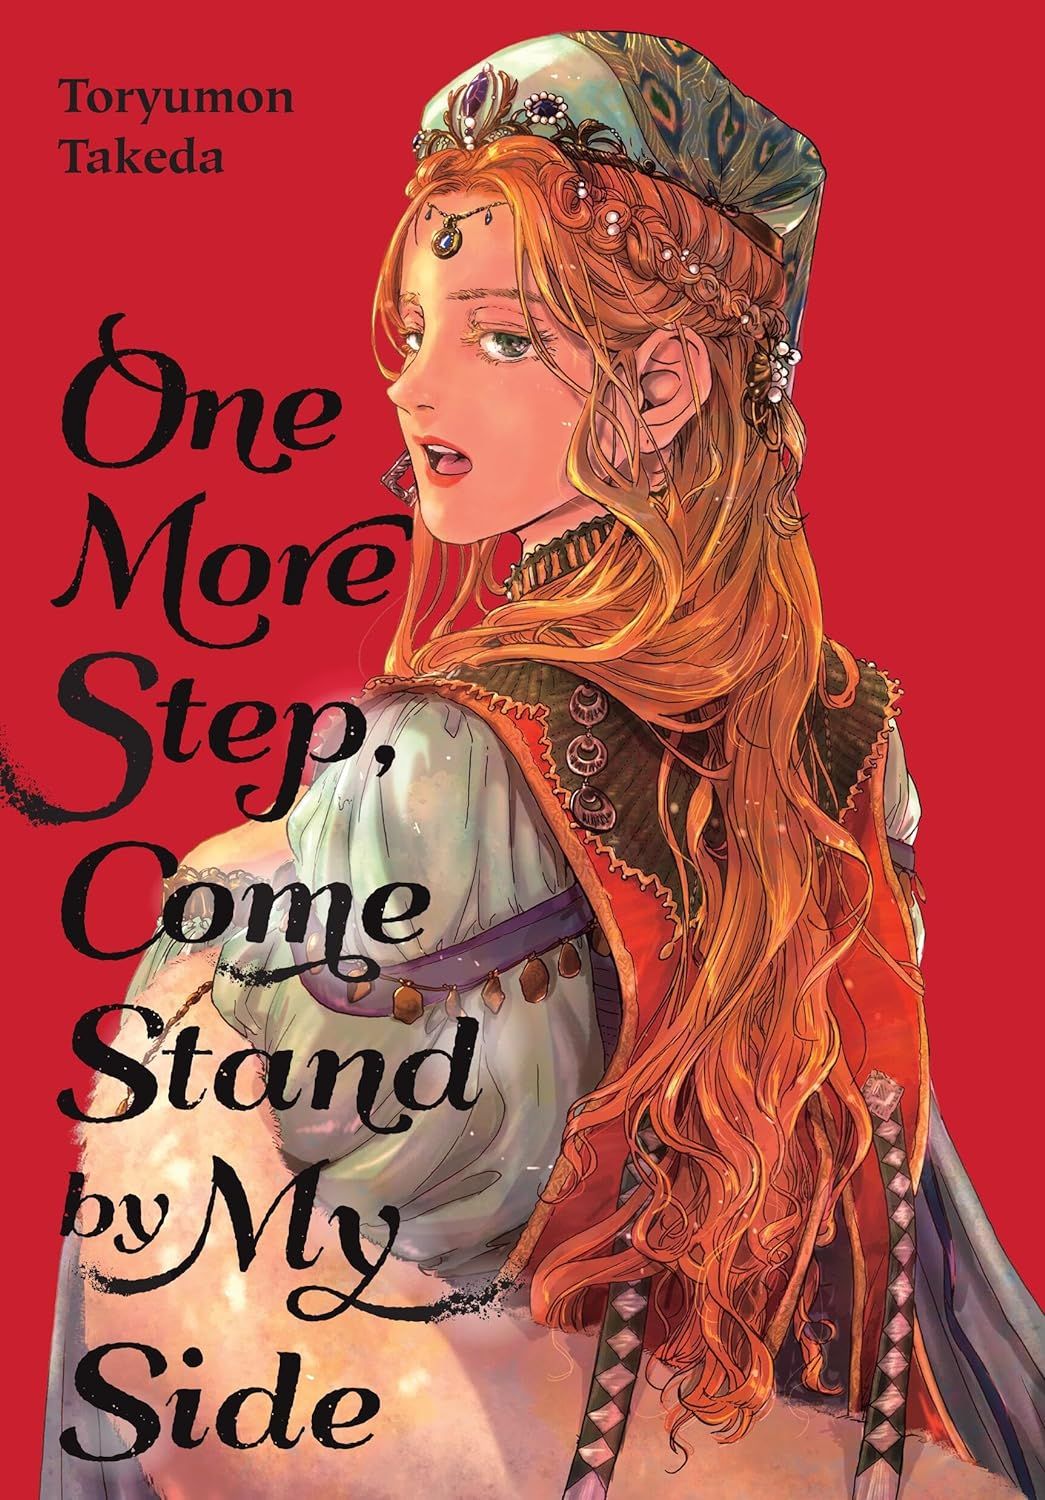 One More Step, Come Stand By My Side by Toryumon Takeda cover